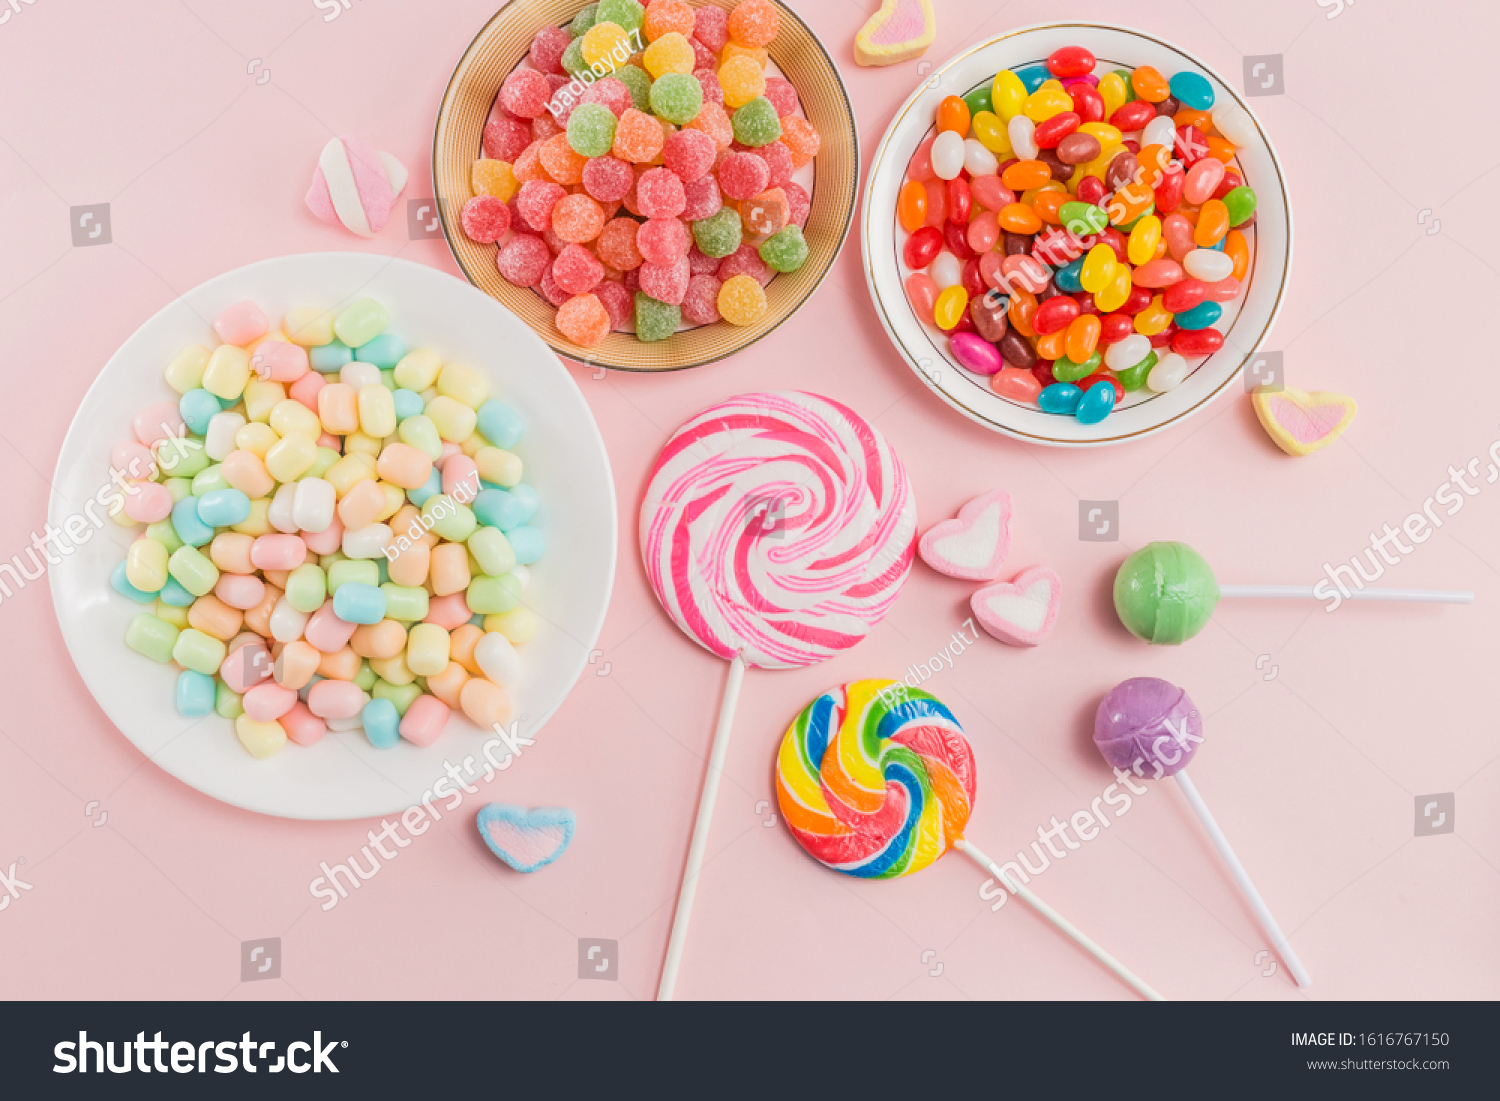 Many types, many flavors and many colors of candy #1616767150